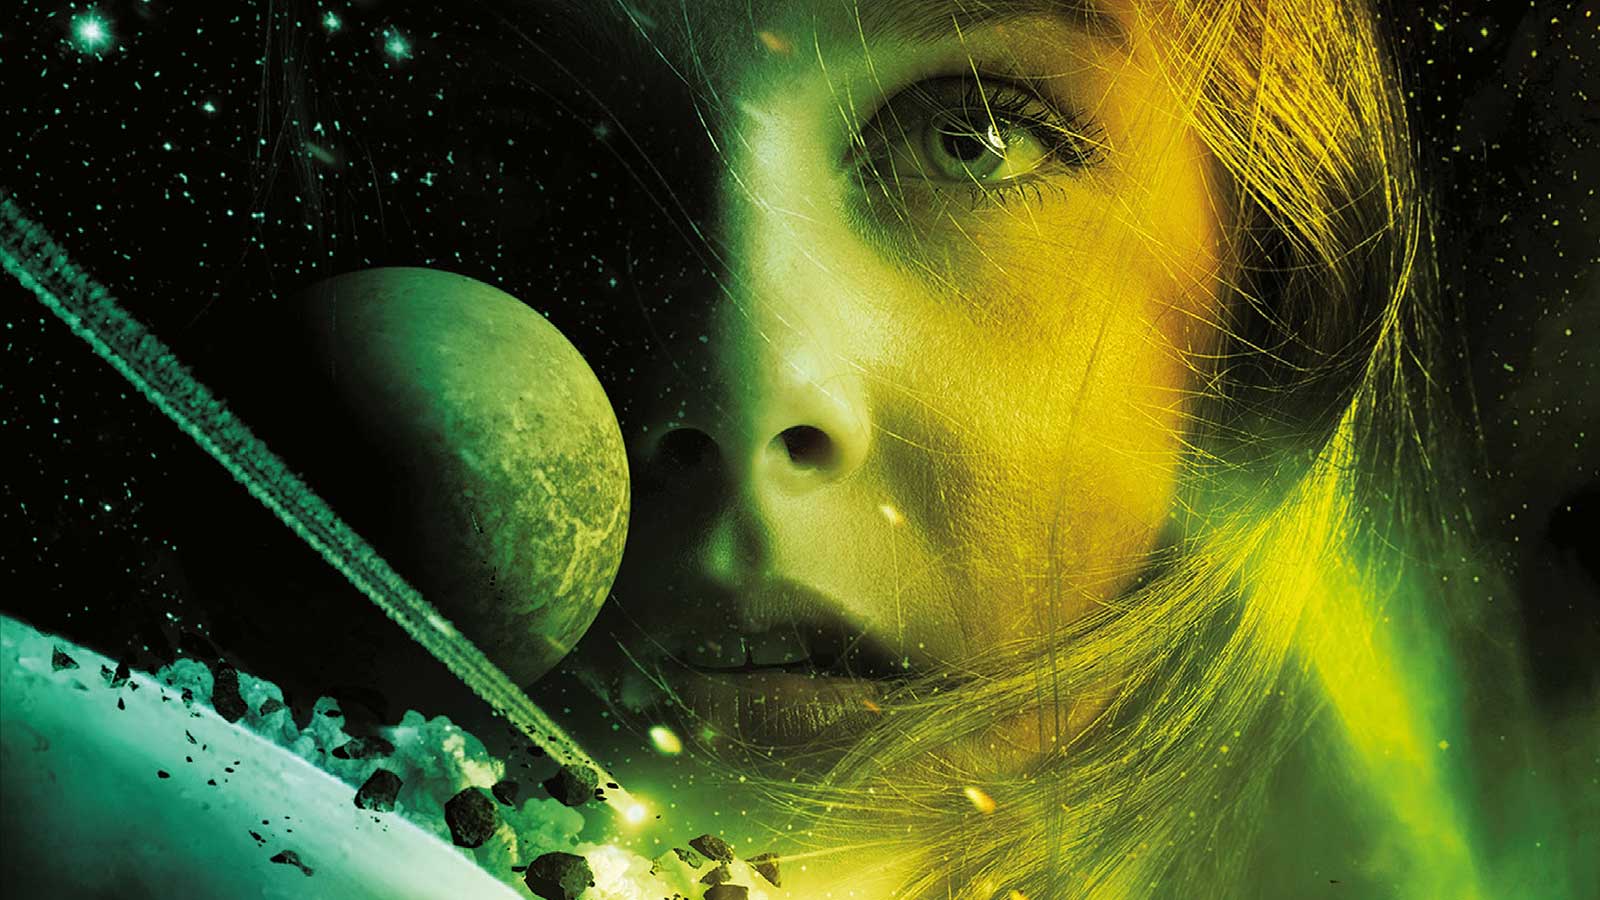 A girls face superimposed against the backdrop of planets and stars